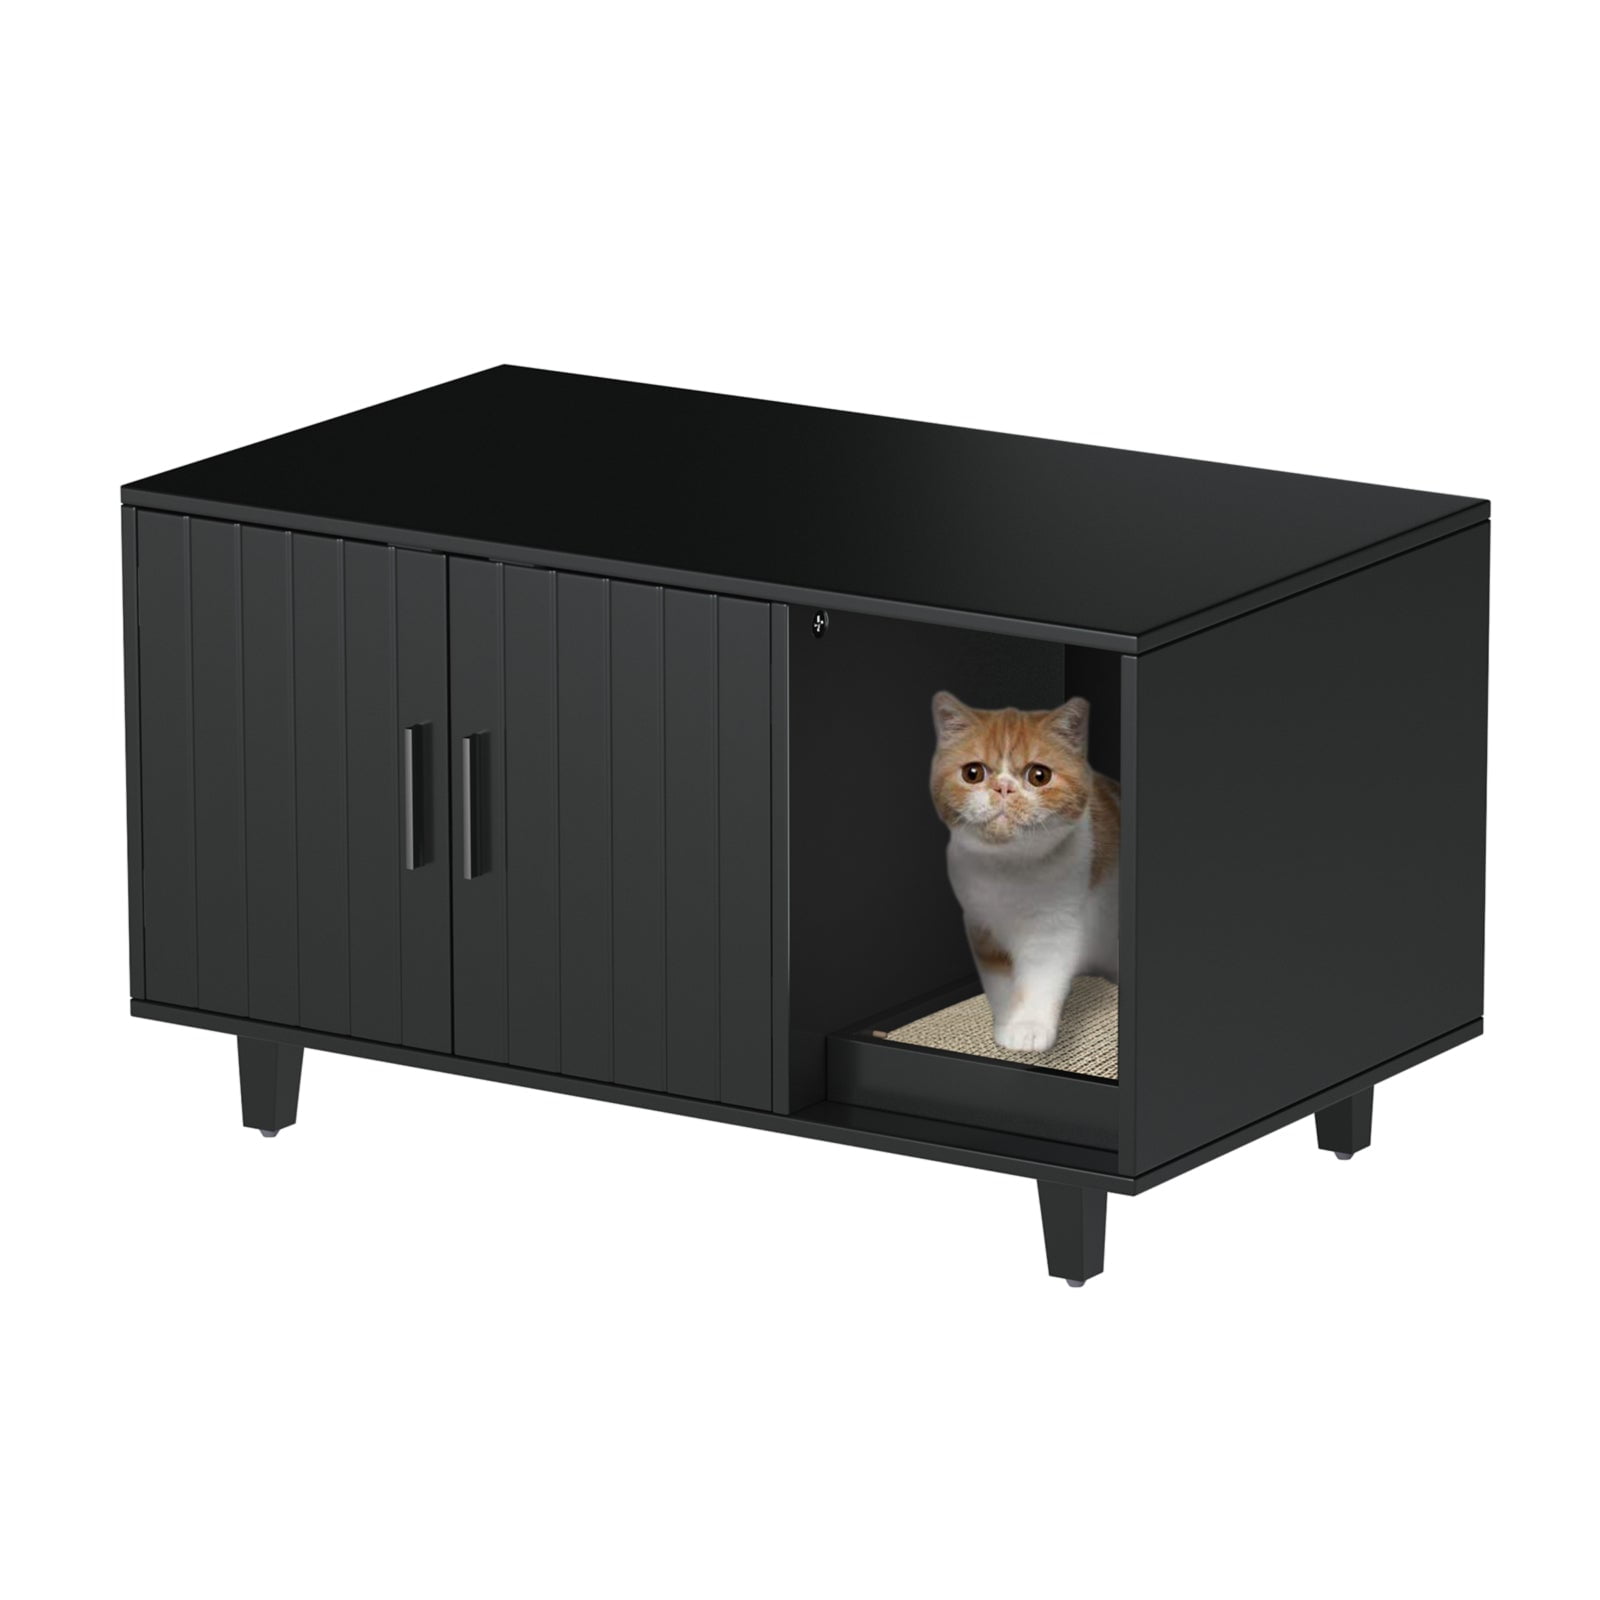 GOOD LIFE USA Modern Wood Pet Crate Cat Washroom Hidden Litter Box Enclosure Furniture House Table Nightstand with Cat Scratch Pad 